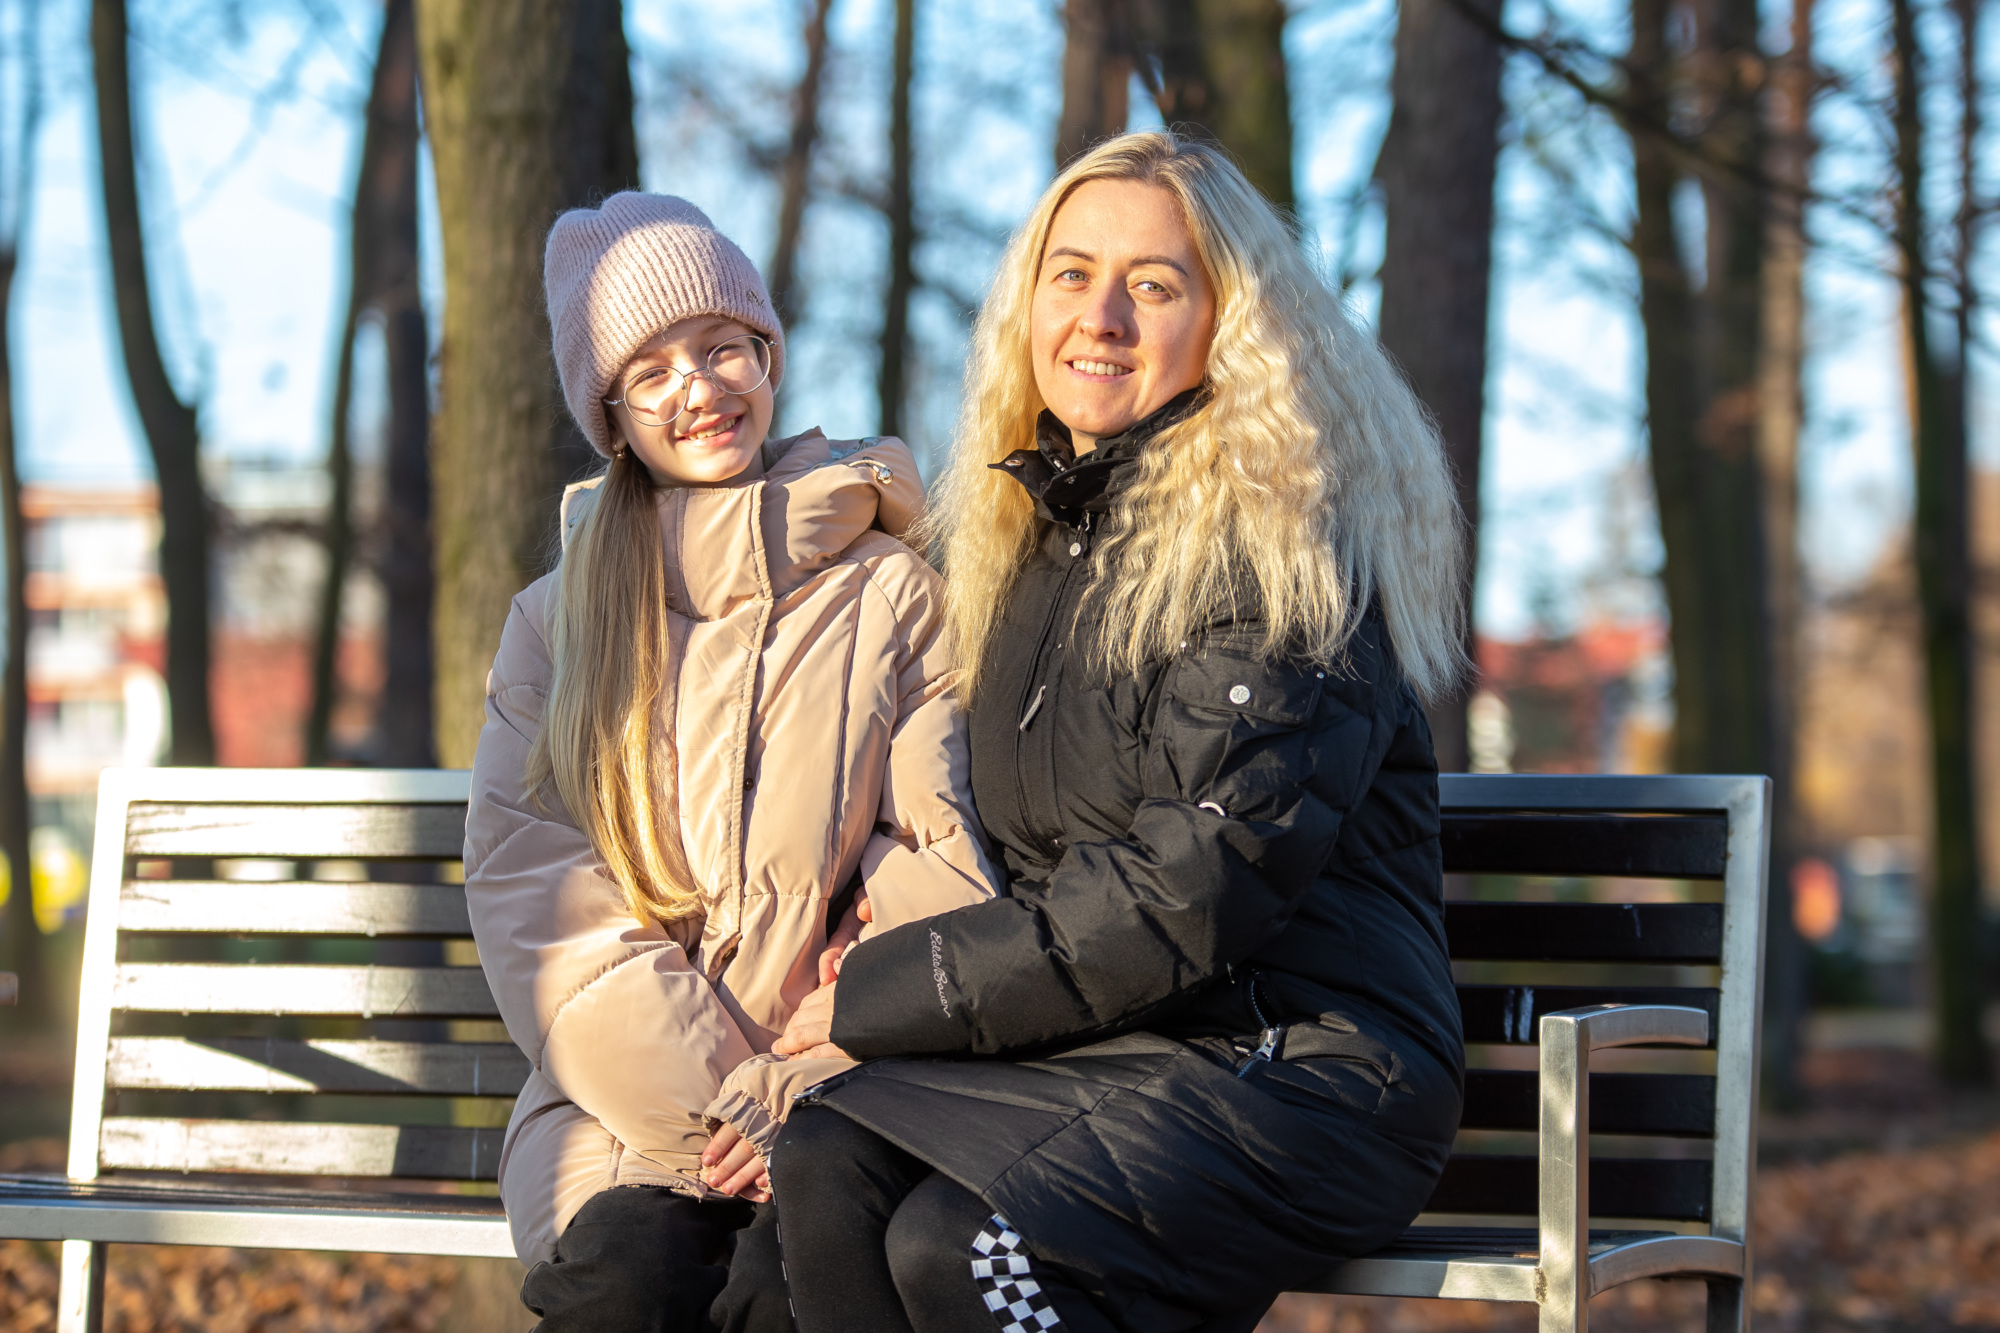 Marcharyta Boichuk and and her mother Iryna Polova sit together on a park bench.